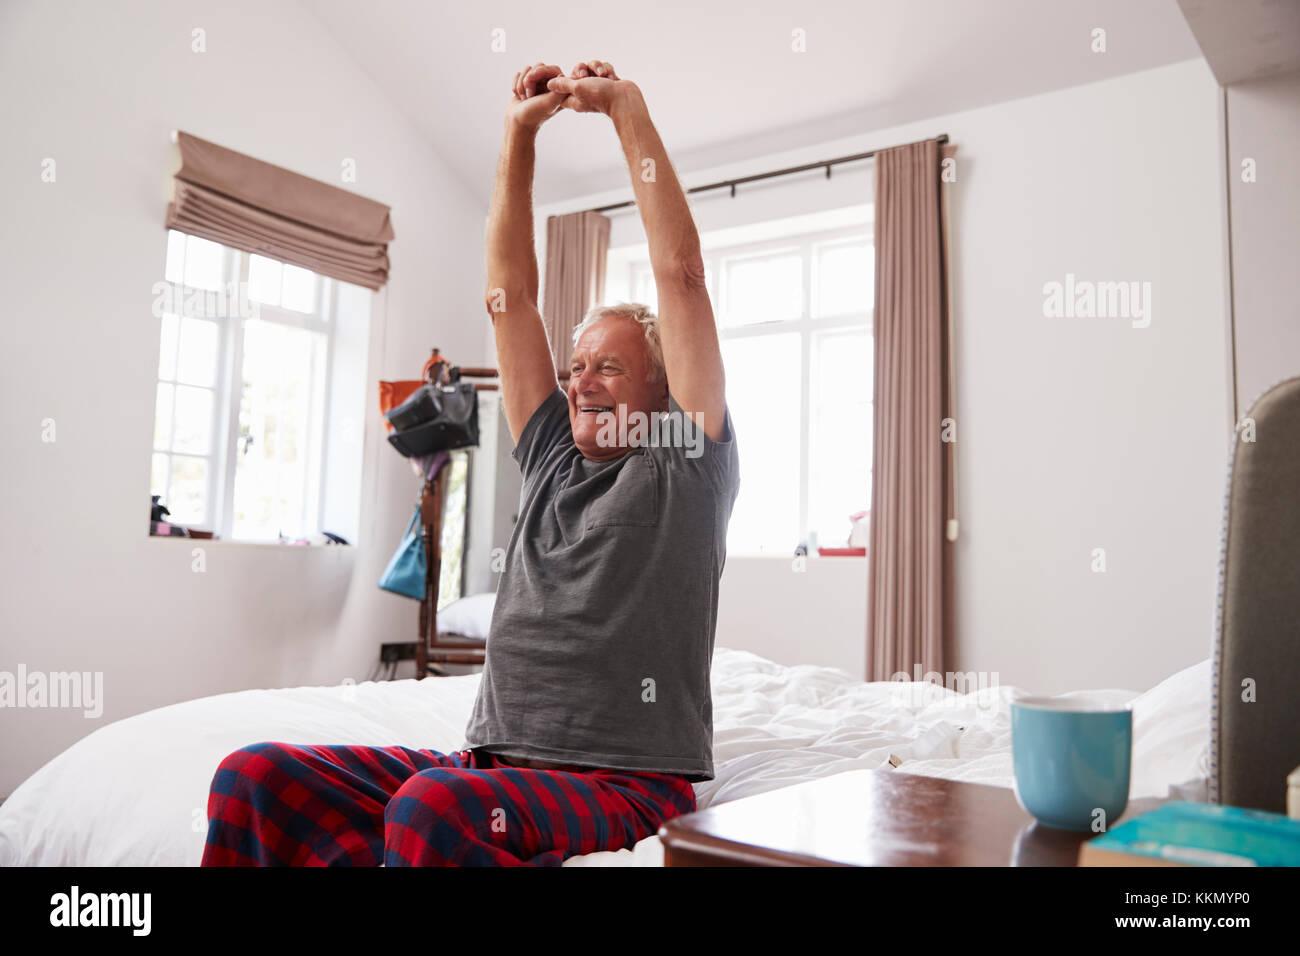 Senior Man Waking Up And Stretching In Bedroom Stock Photo